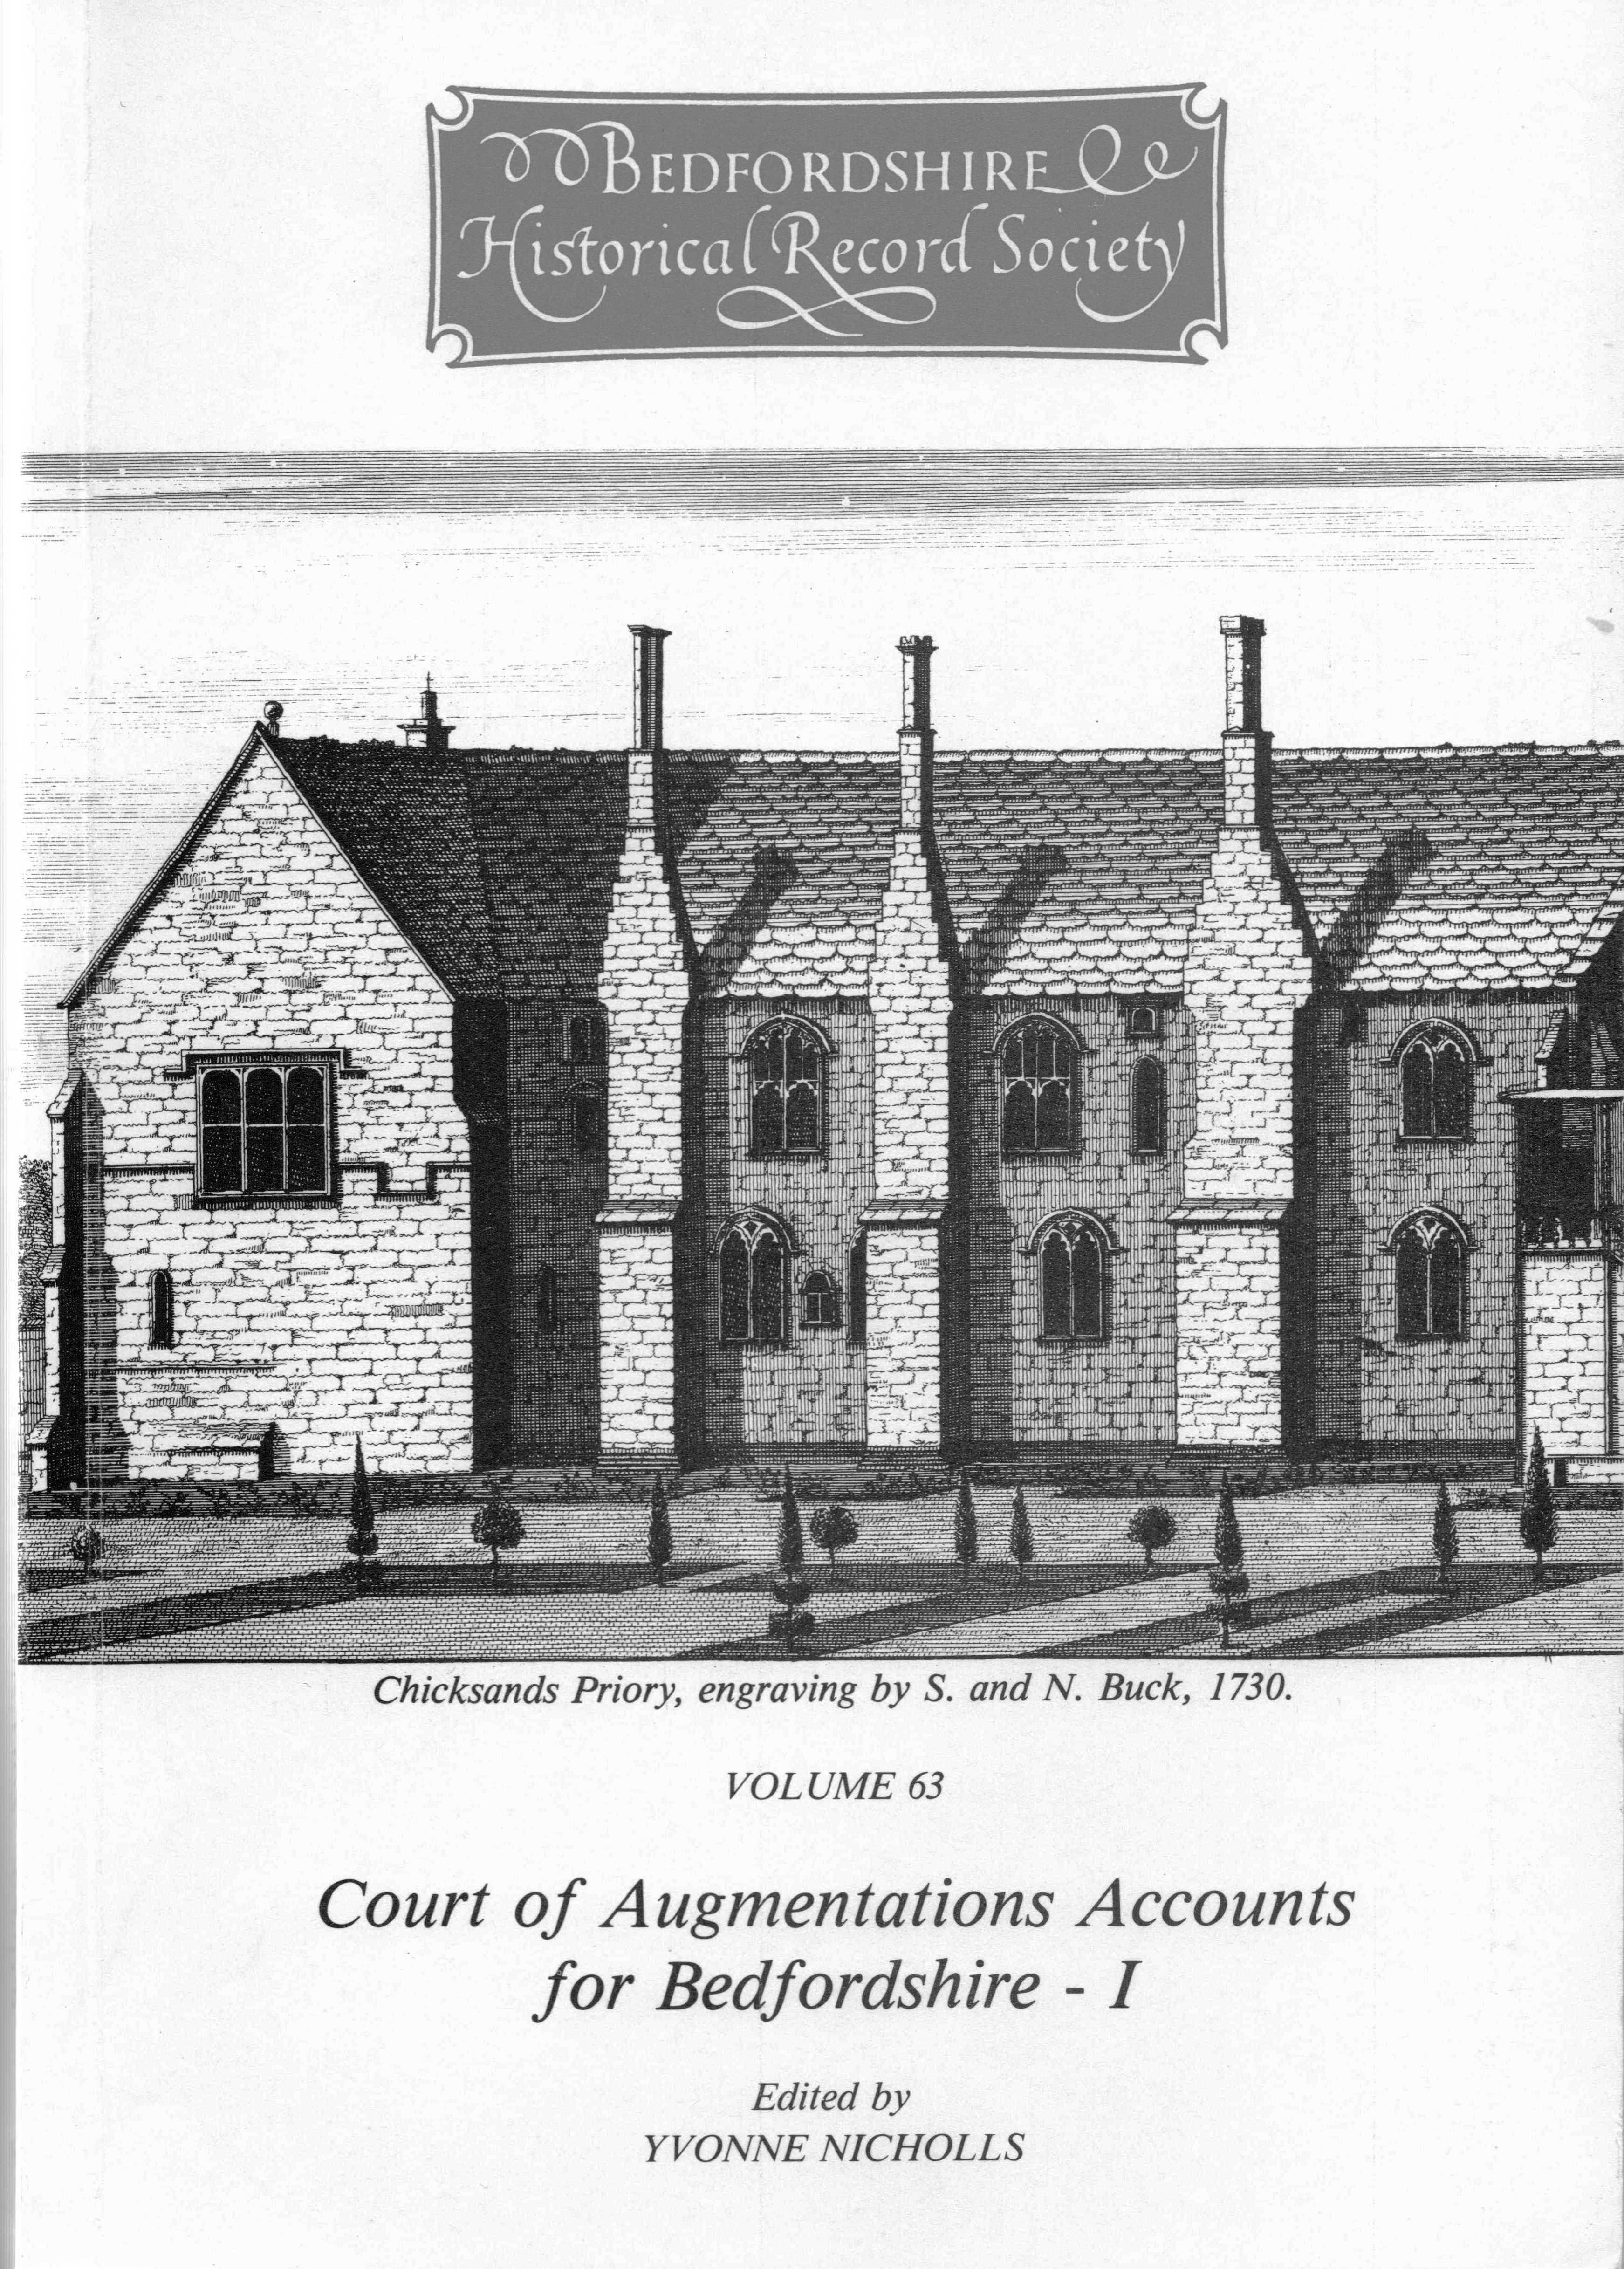 Court of Augmentations Accounts for Bedfordshire - I